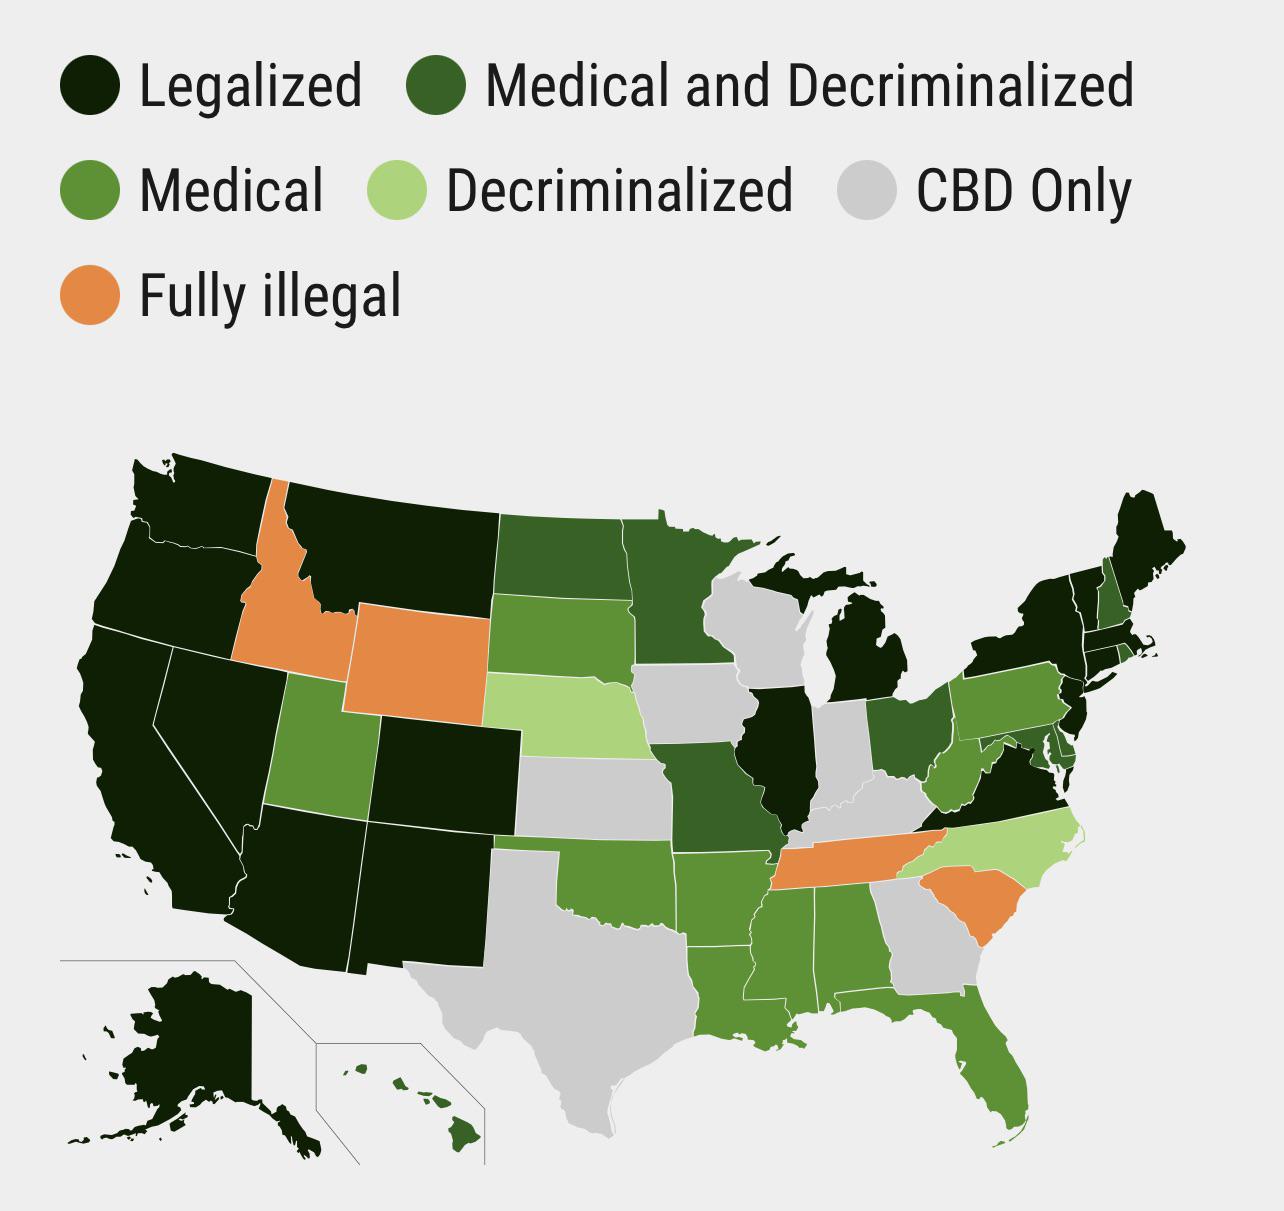 infographics and charts - legal marijuanas states - Legalized Medical Fully illegal Medical and Decriminalized Decriminalized Cbd Only